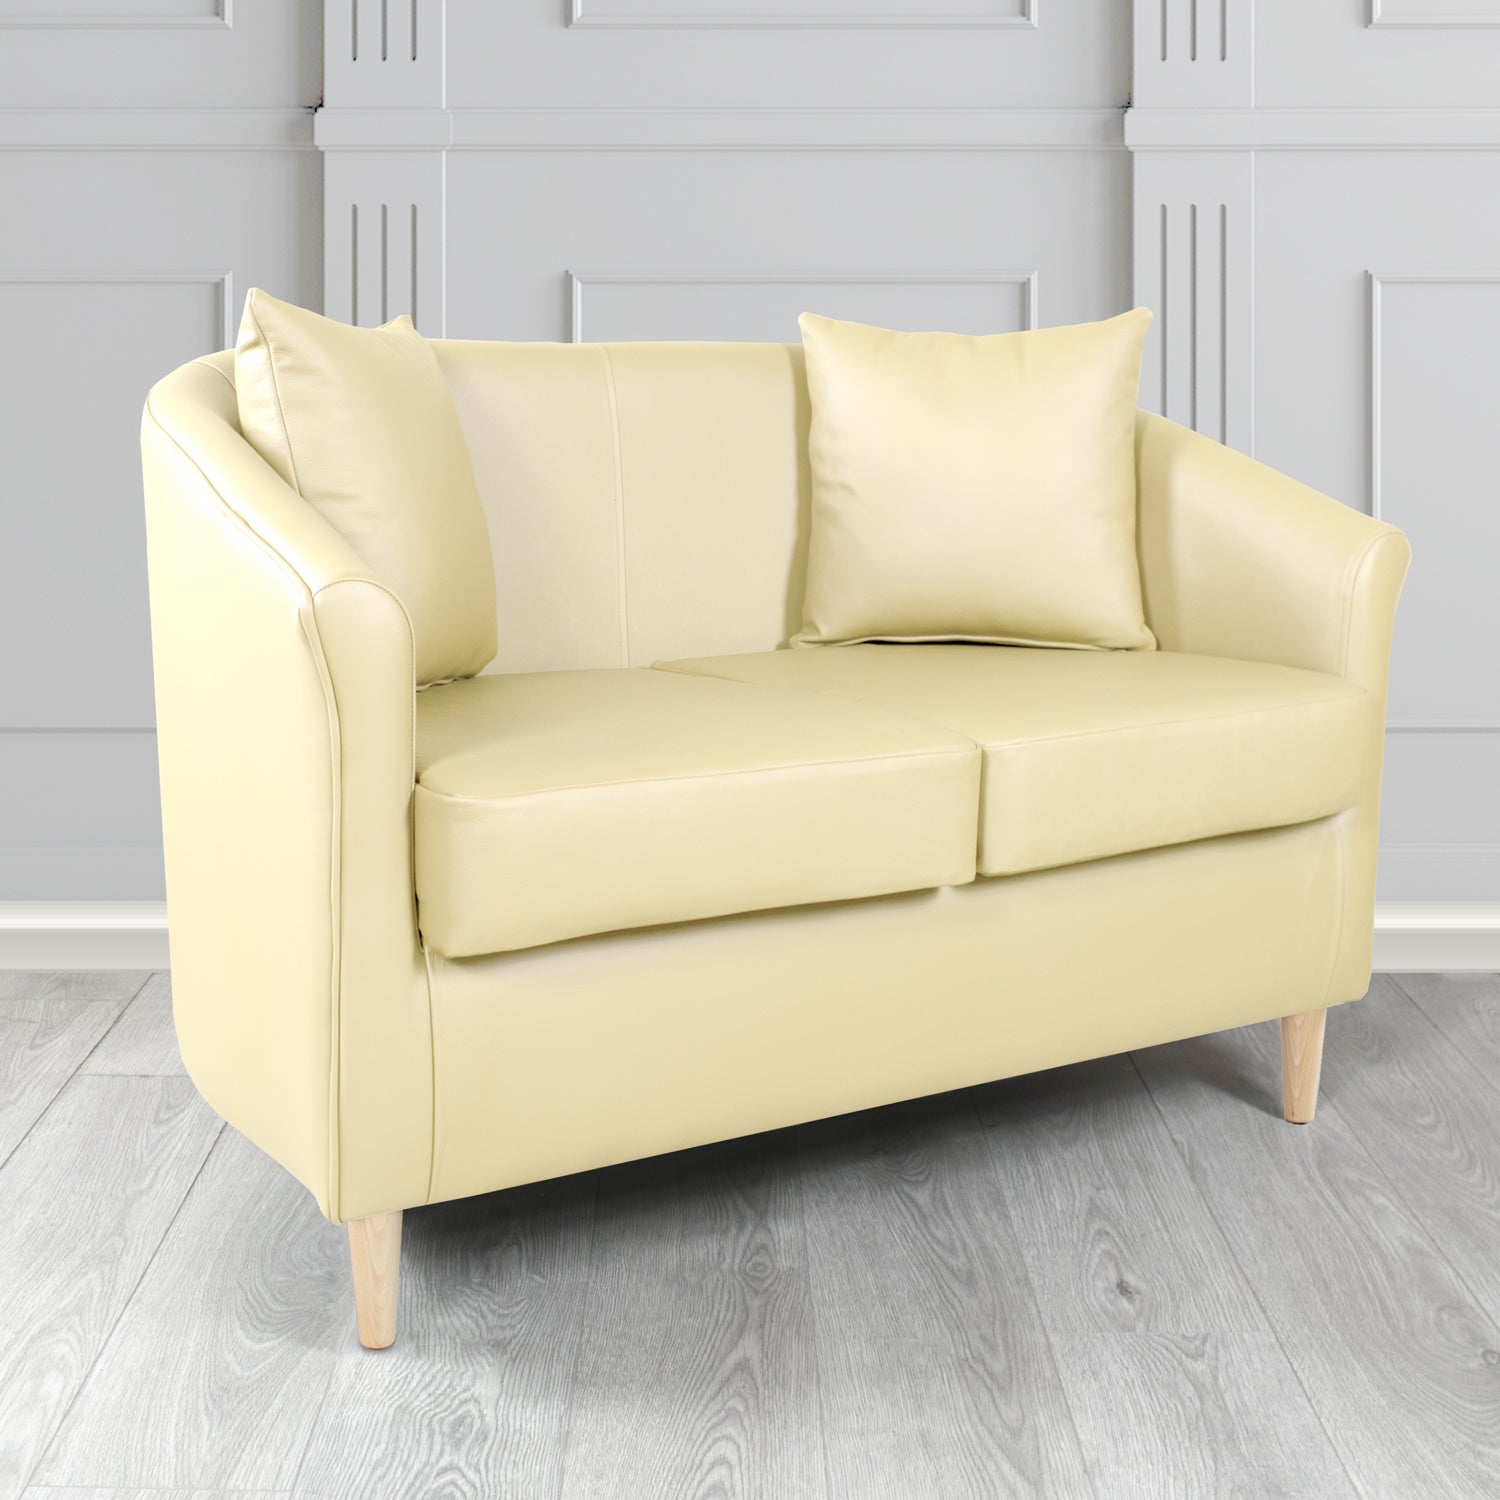 St Tropez Shelly Cream Crib 5 Genuine Leather 2 Seater Tub Sofa with Scatter Cushions - The Tub Chair Shop